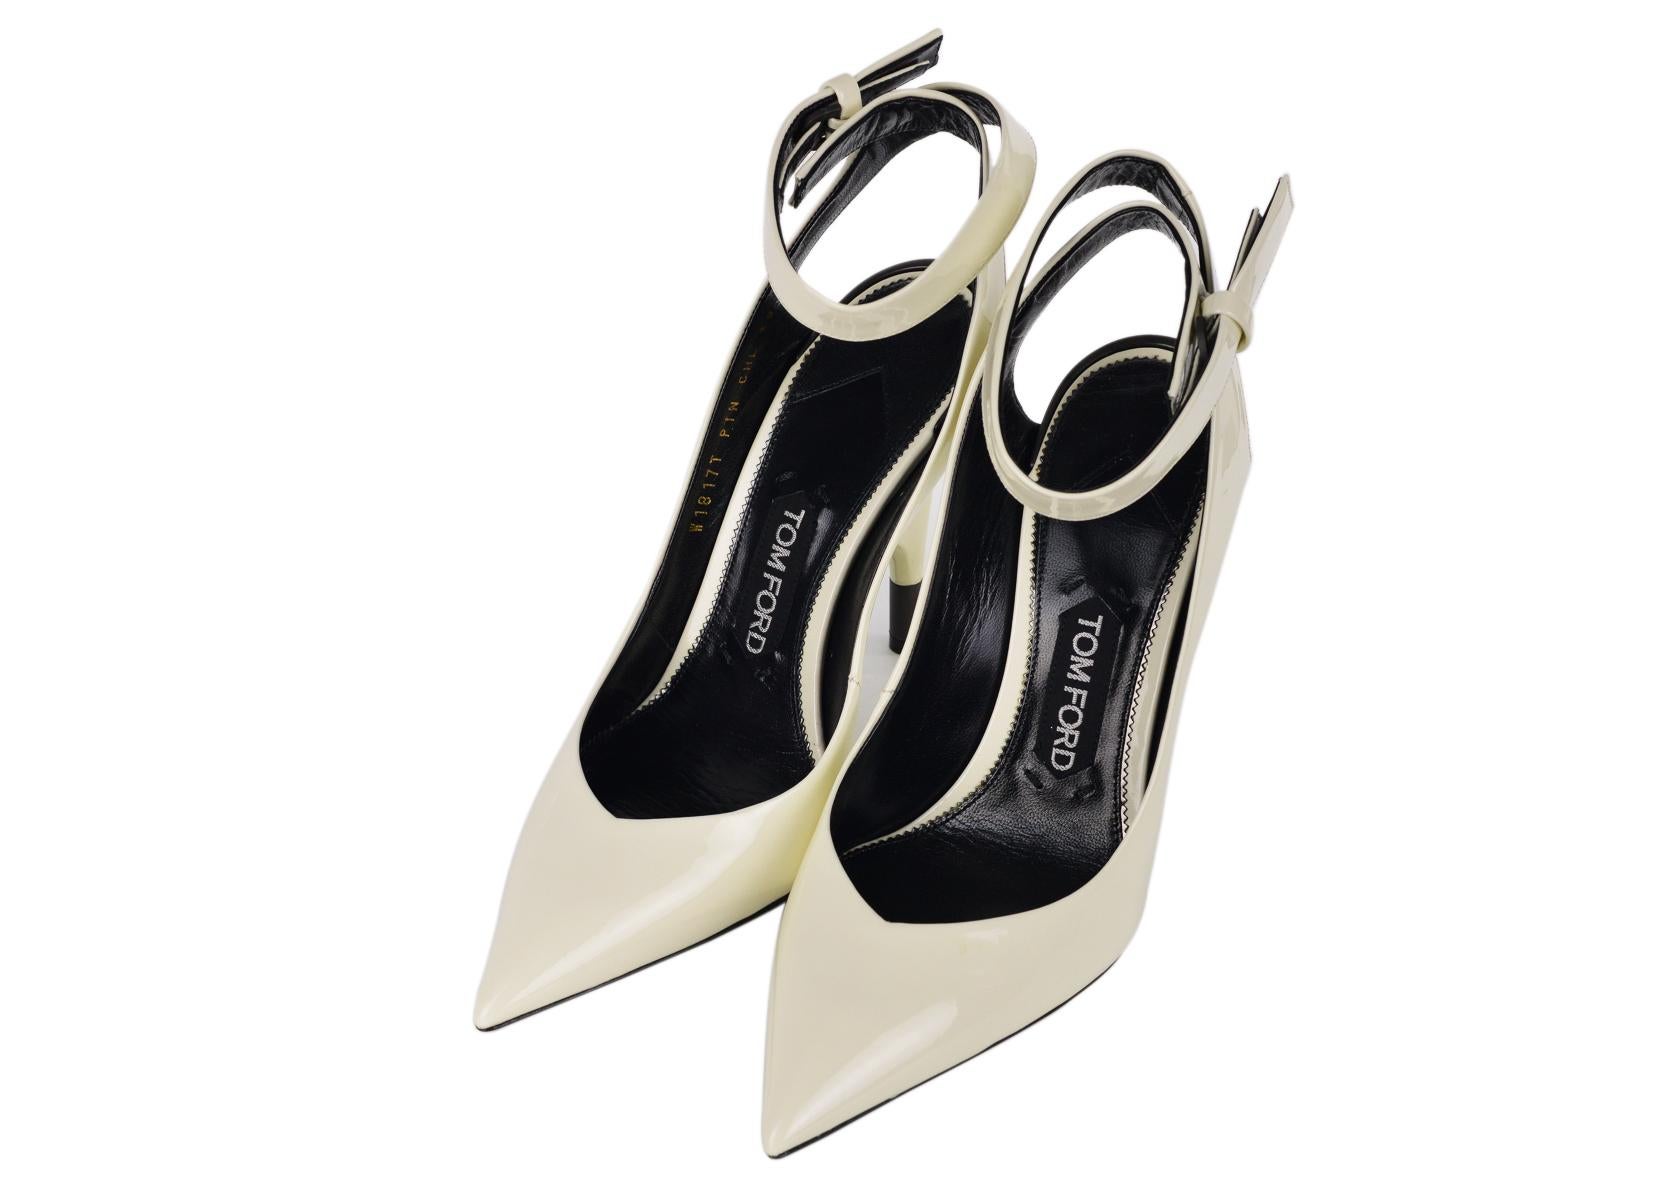 Tom Ford's covered heel pumps. These pumps feature a classic pointed toe pump with a covered heel. Beautifully crafted and can be paired with a black dress for the perfect completed night out look.

Tom Ford's covered heel pumps
Patent